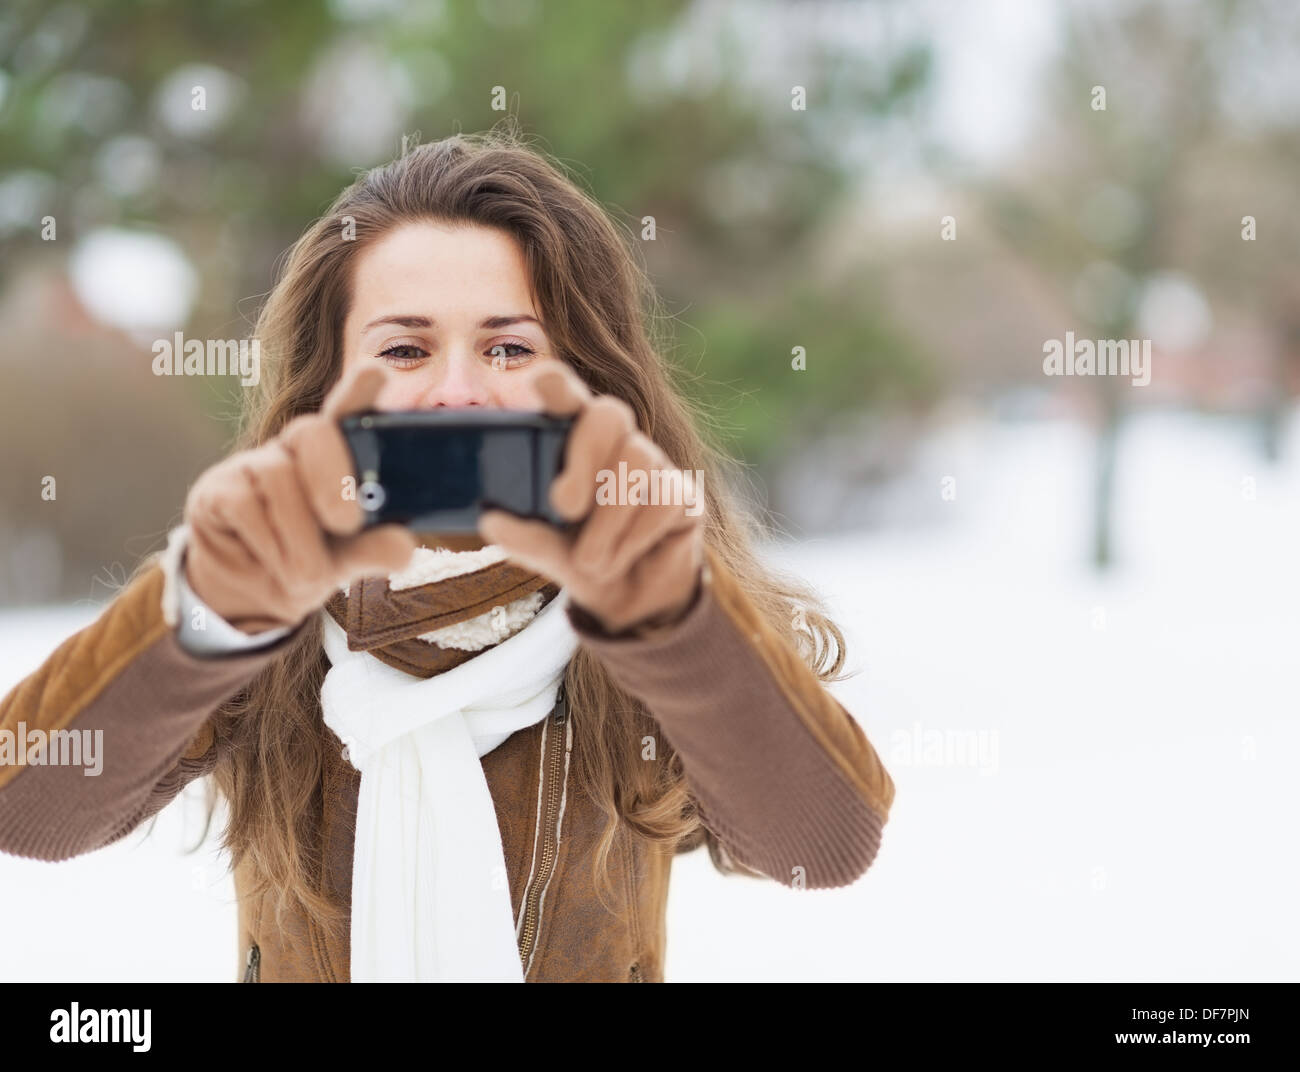 Young woman taking photo using cell phone in winter park Banque D'Images